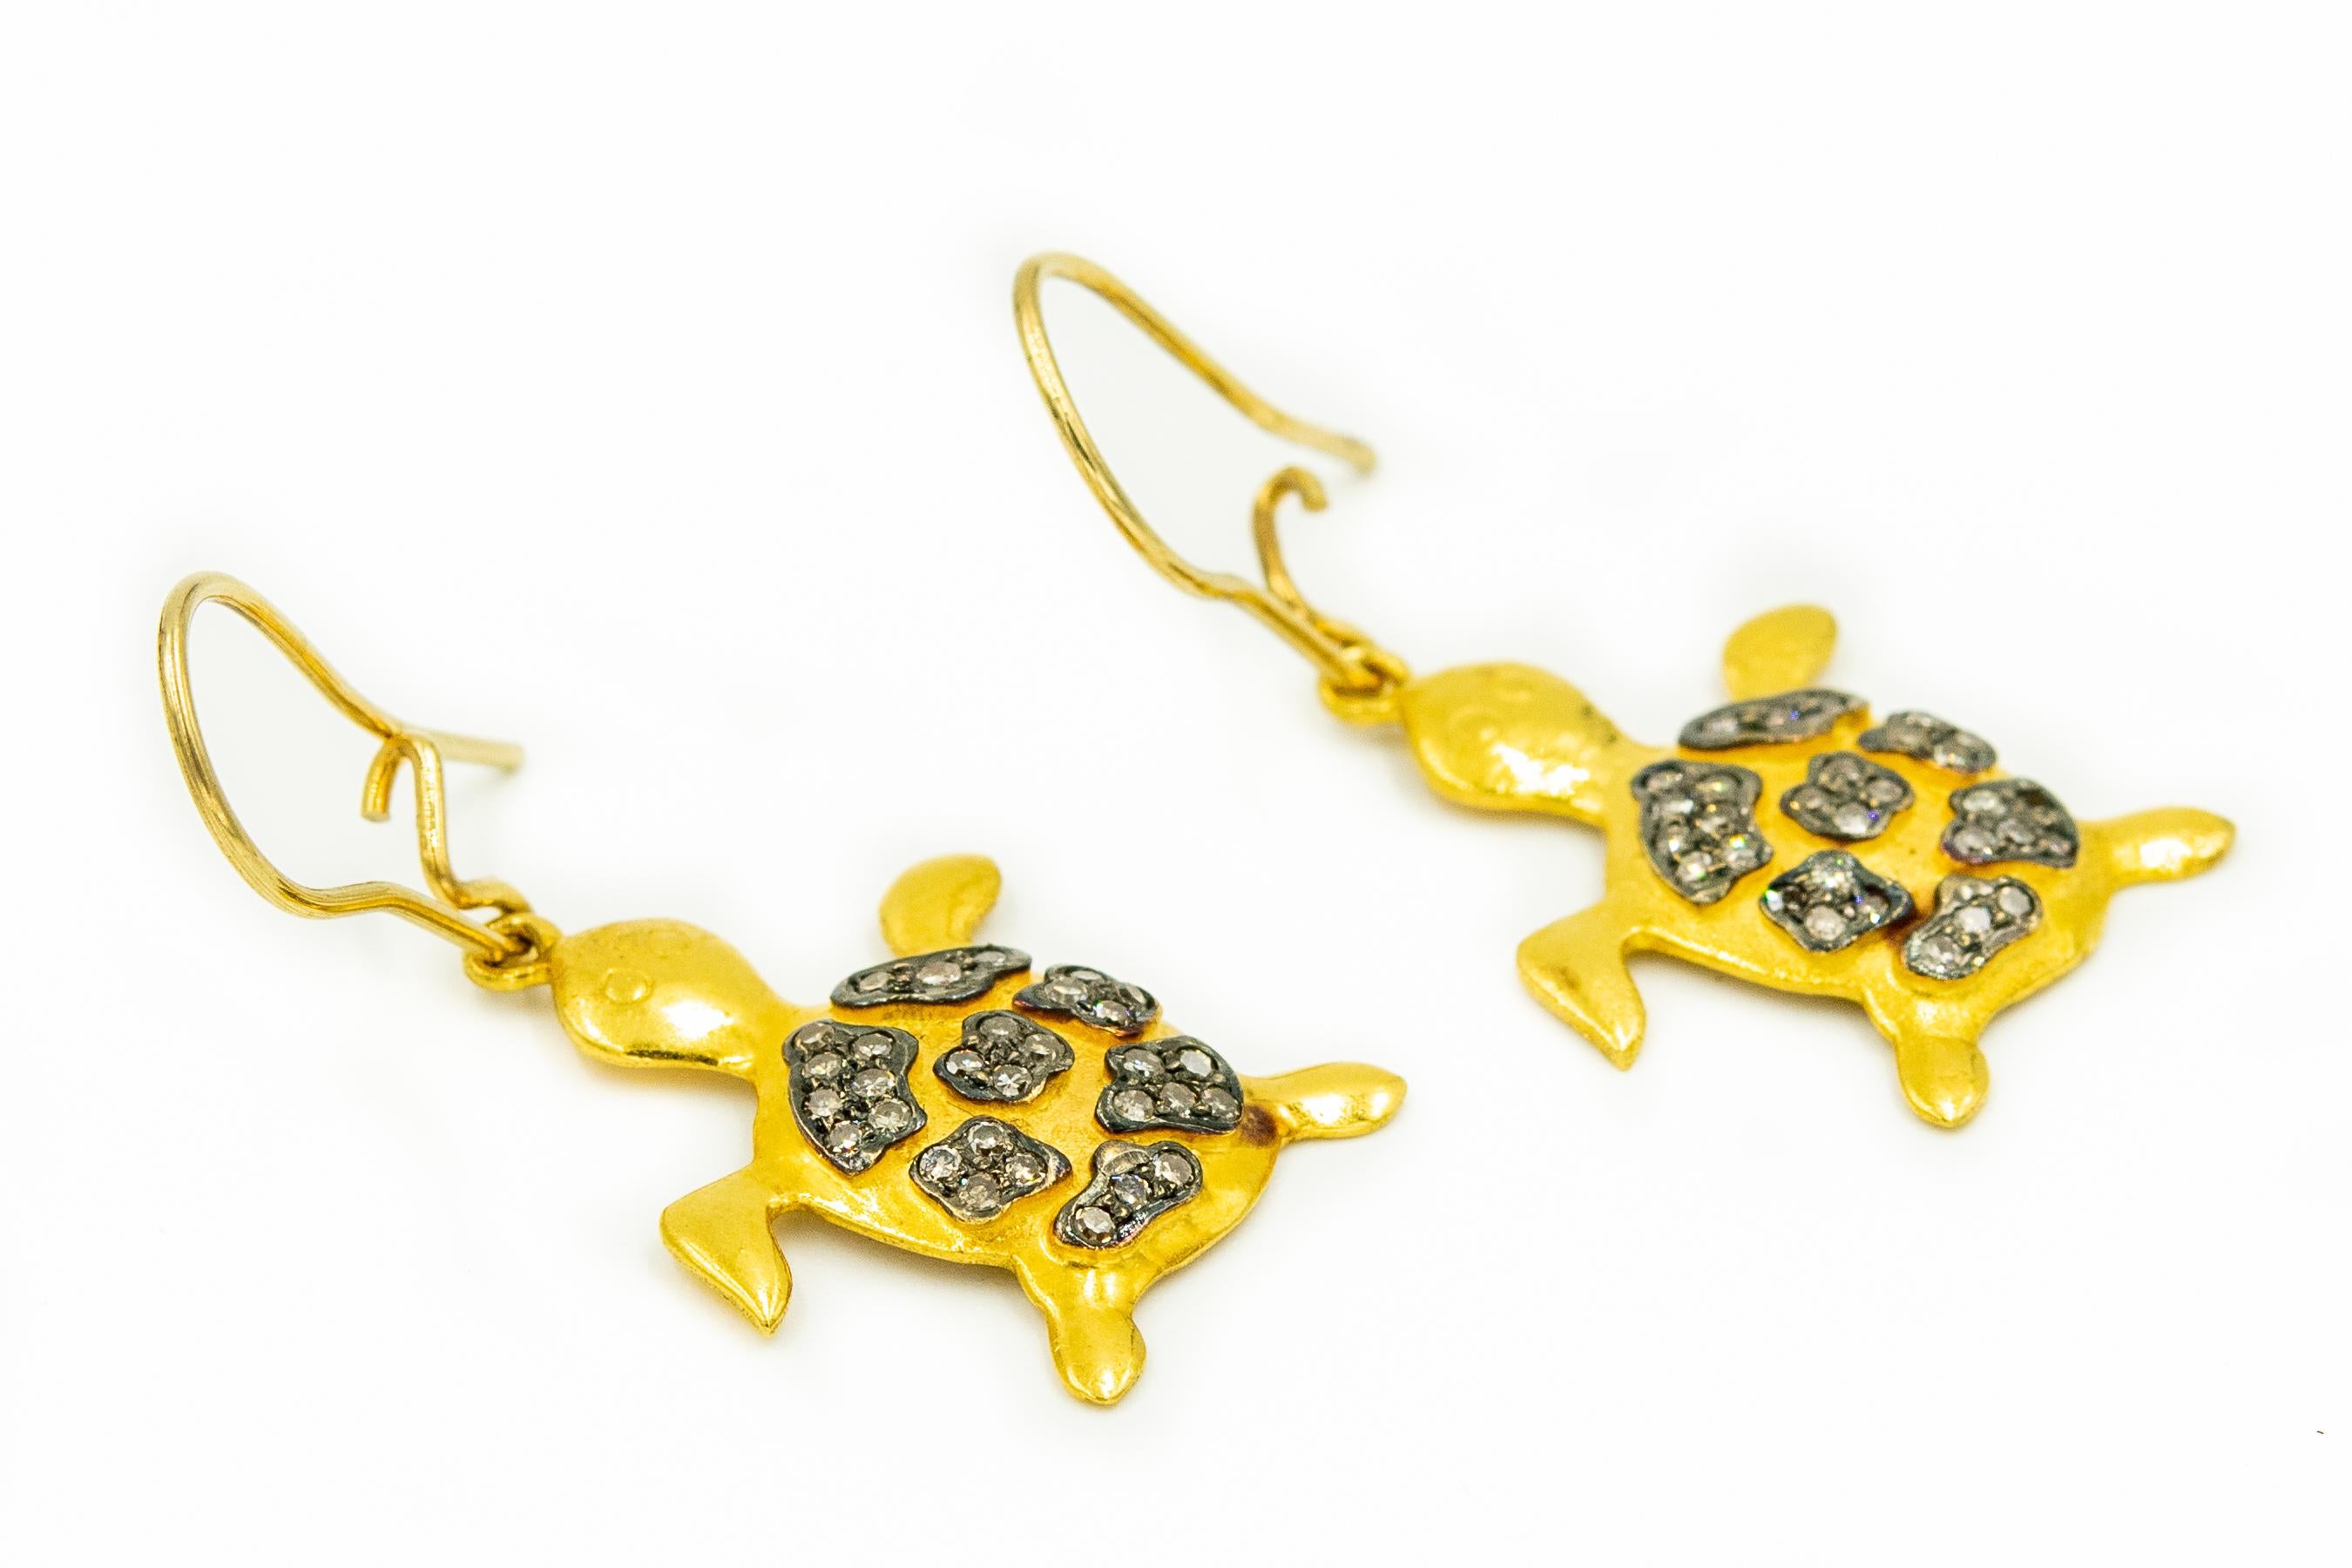 Adorable 14k turtle earrings featuring diamonds set on the back area to represent the shell pattern.  They hang on an 18k yellow gold wire.

The turtles themselves measure .86